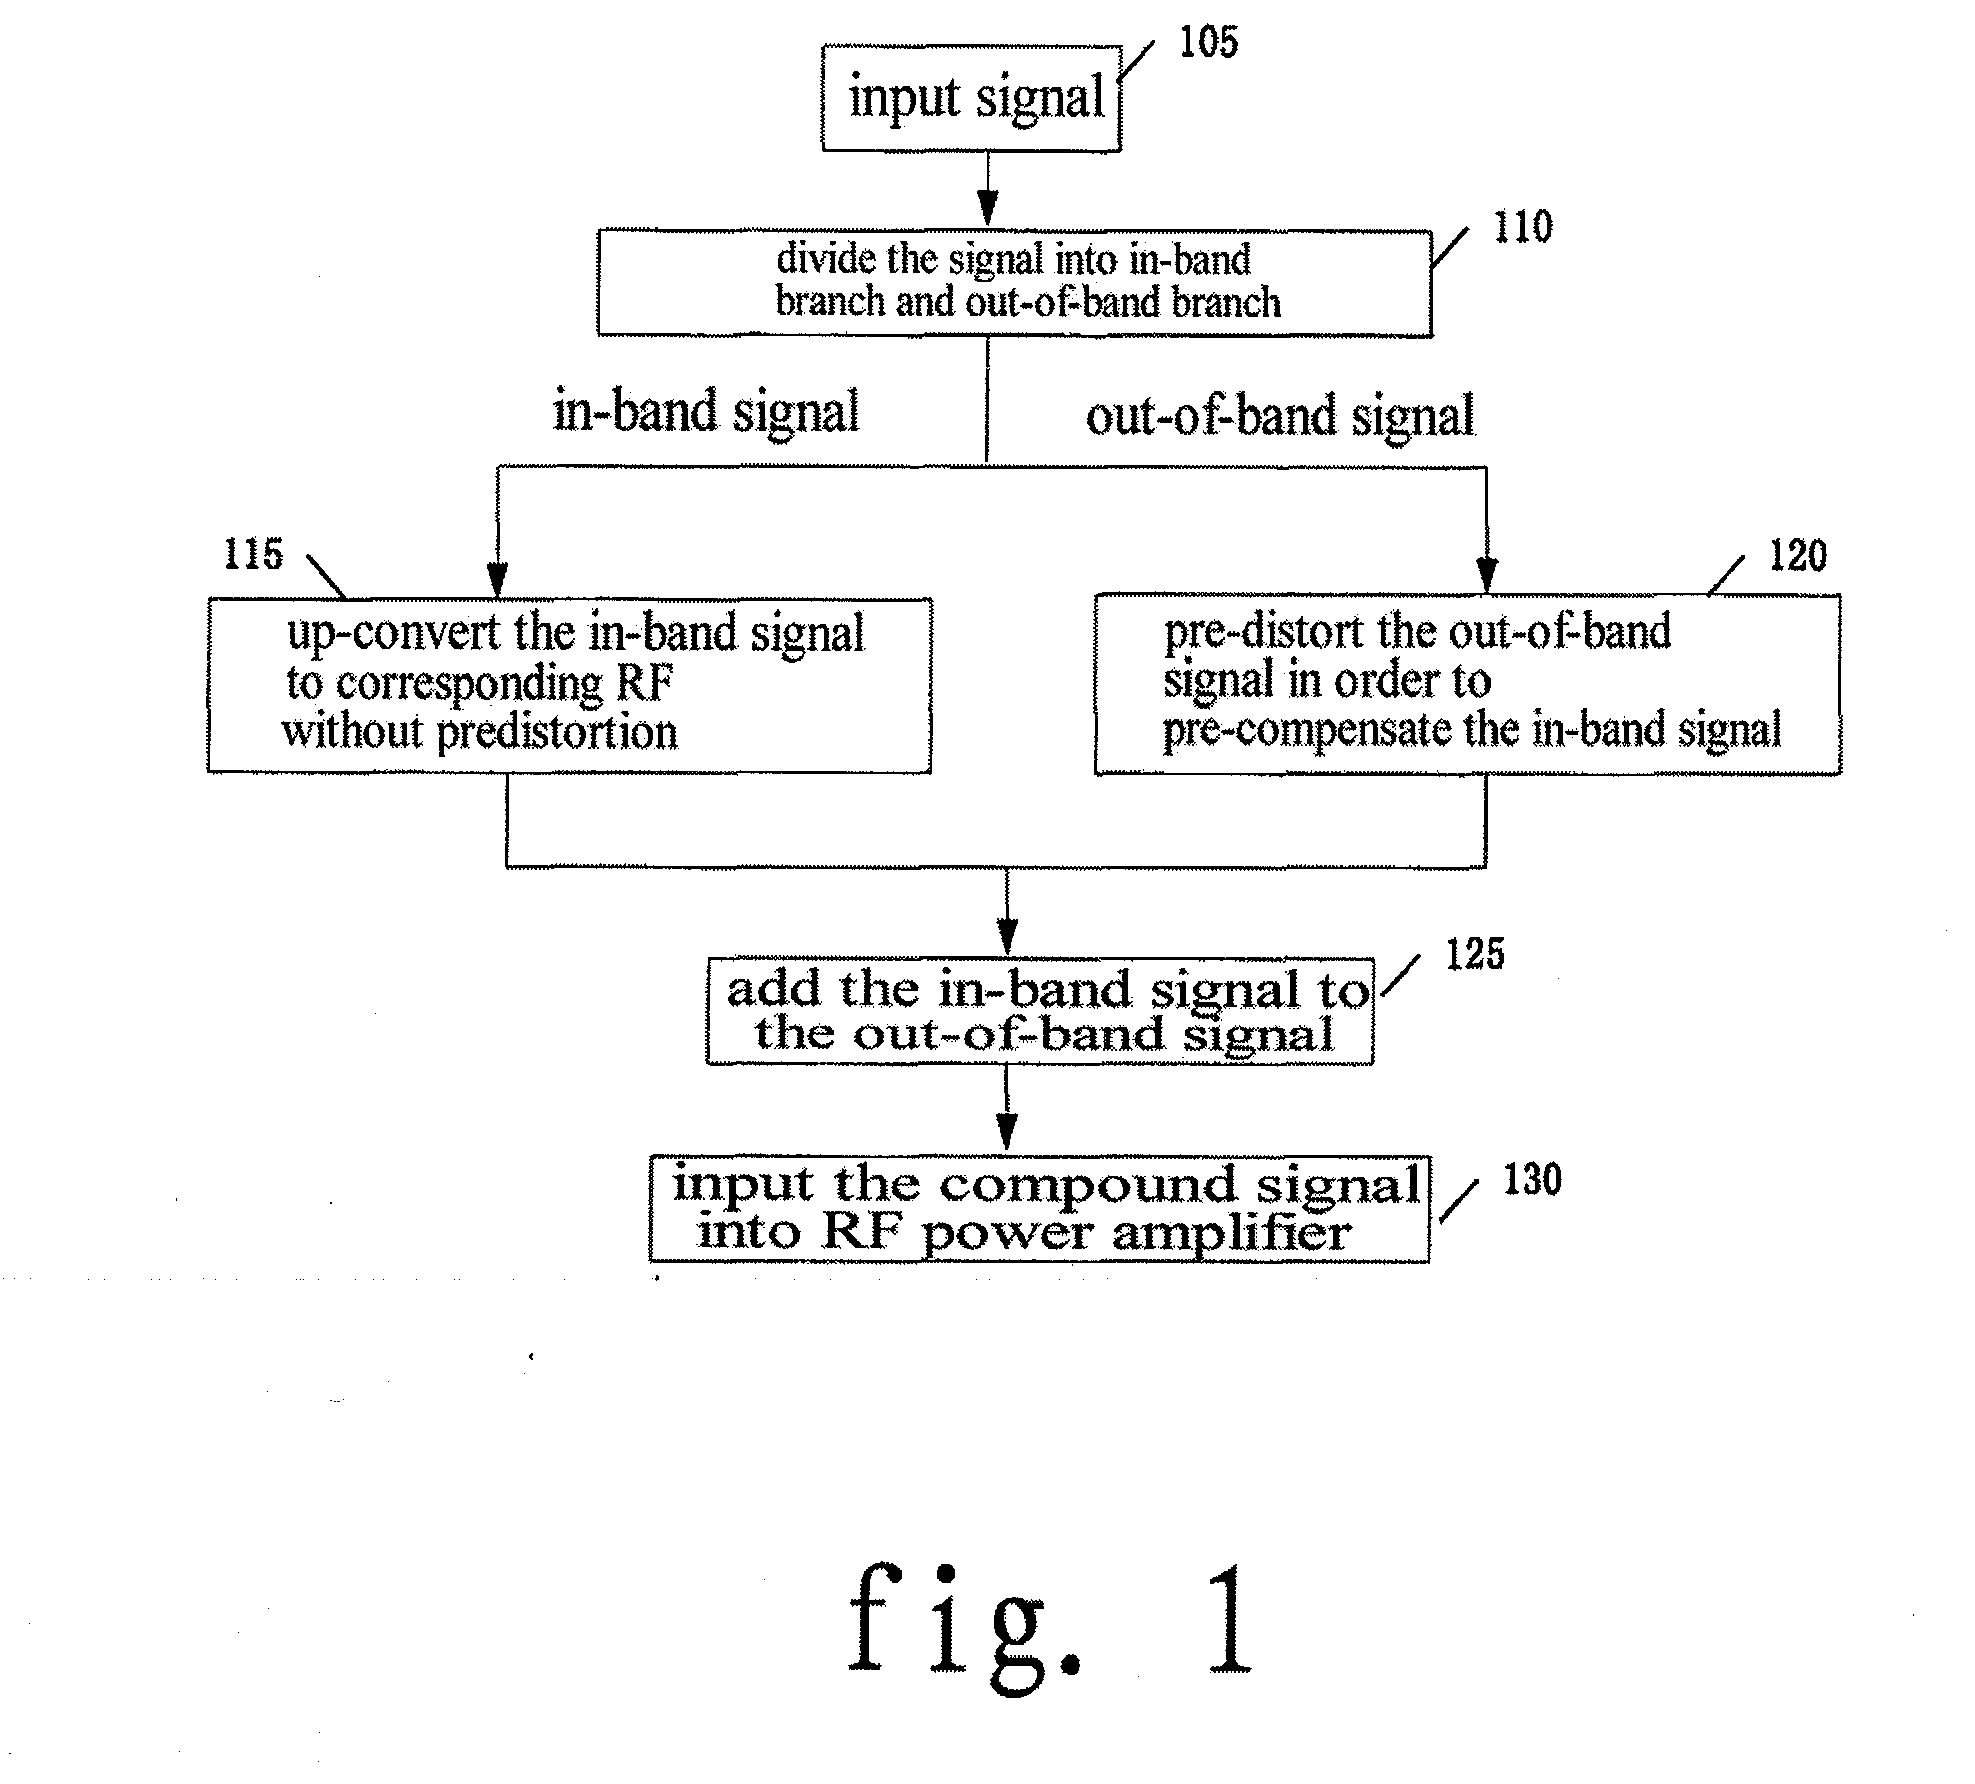 Method and System for out of Band Predistortion Linearization